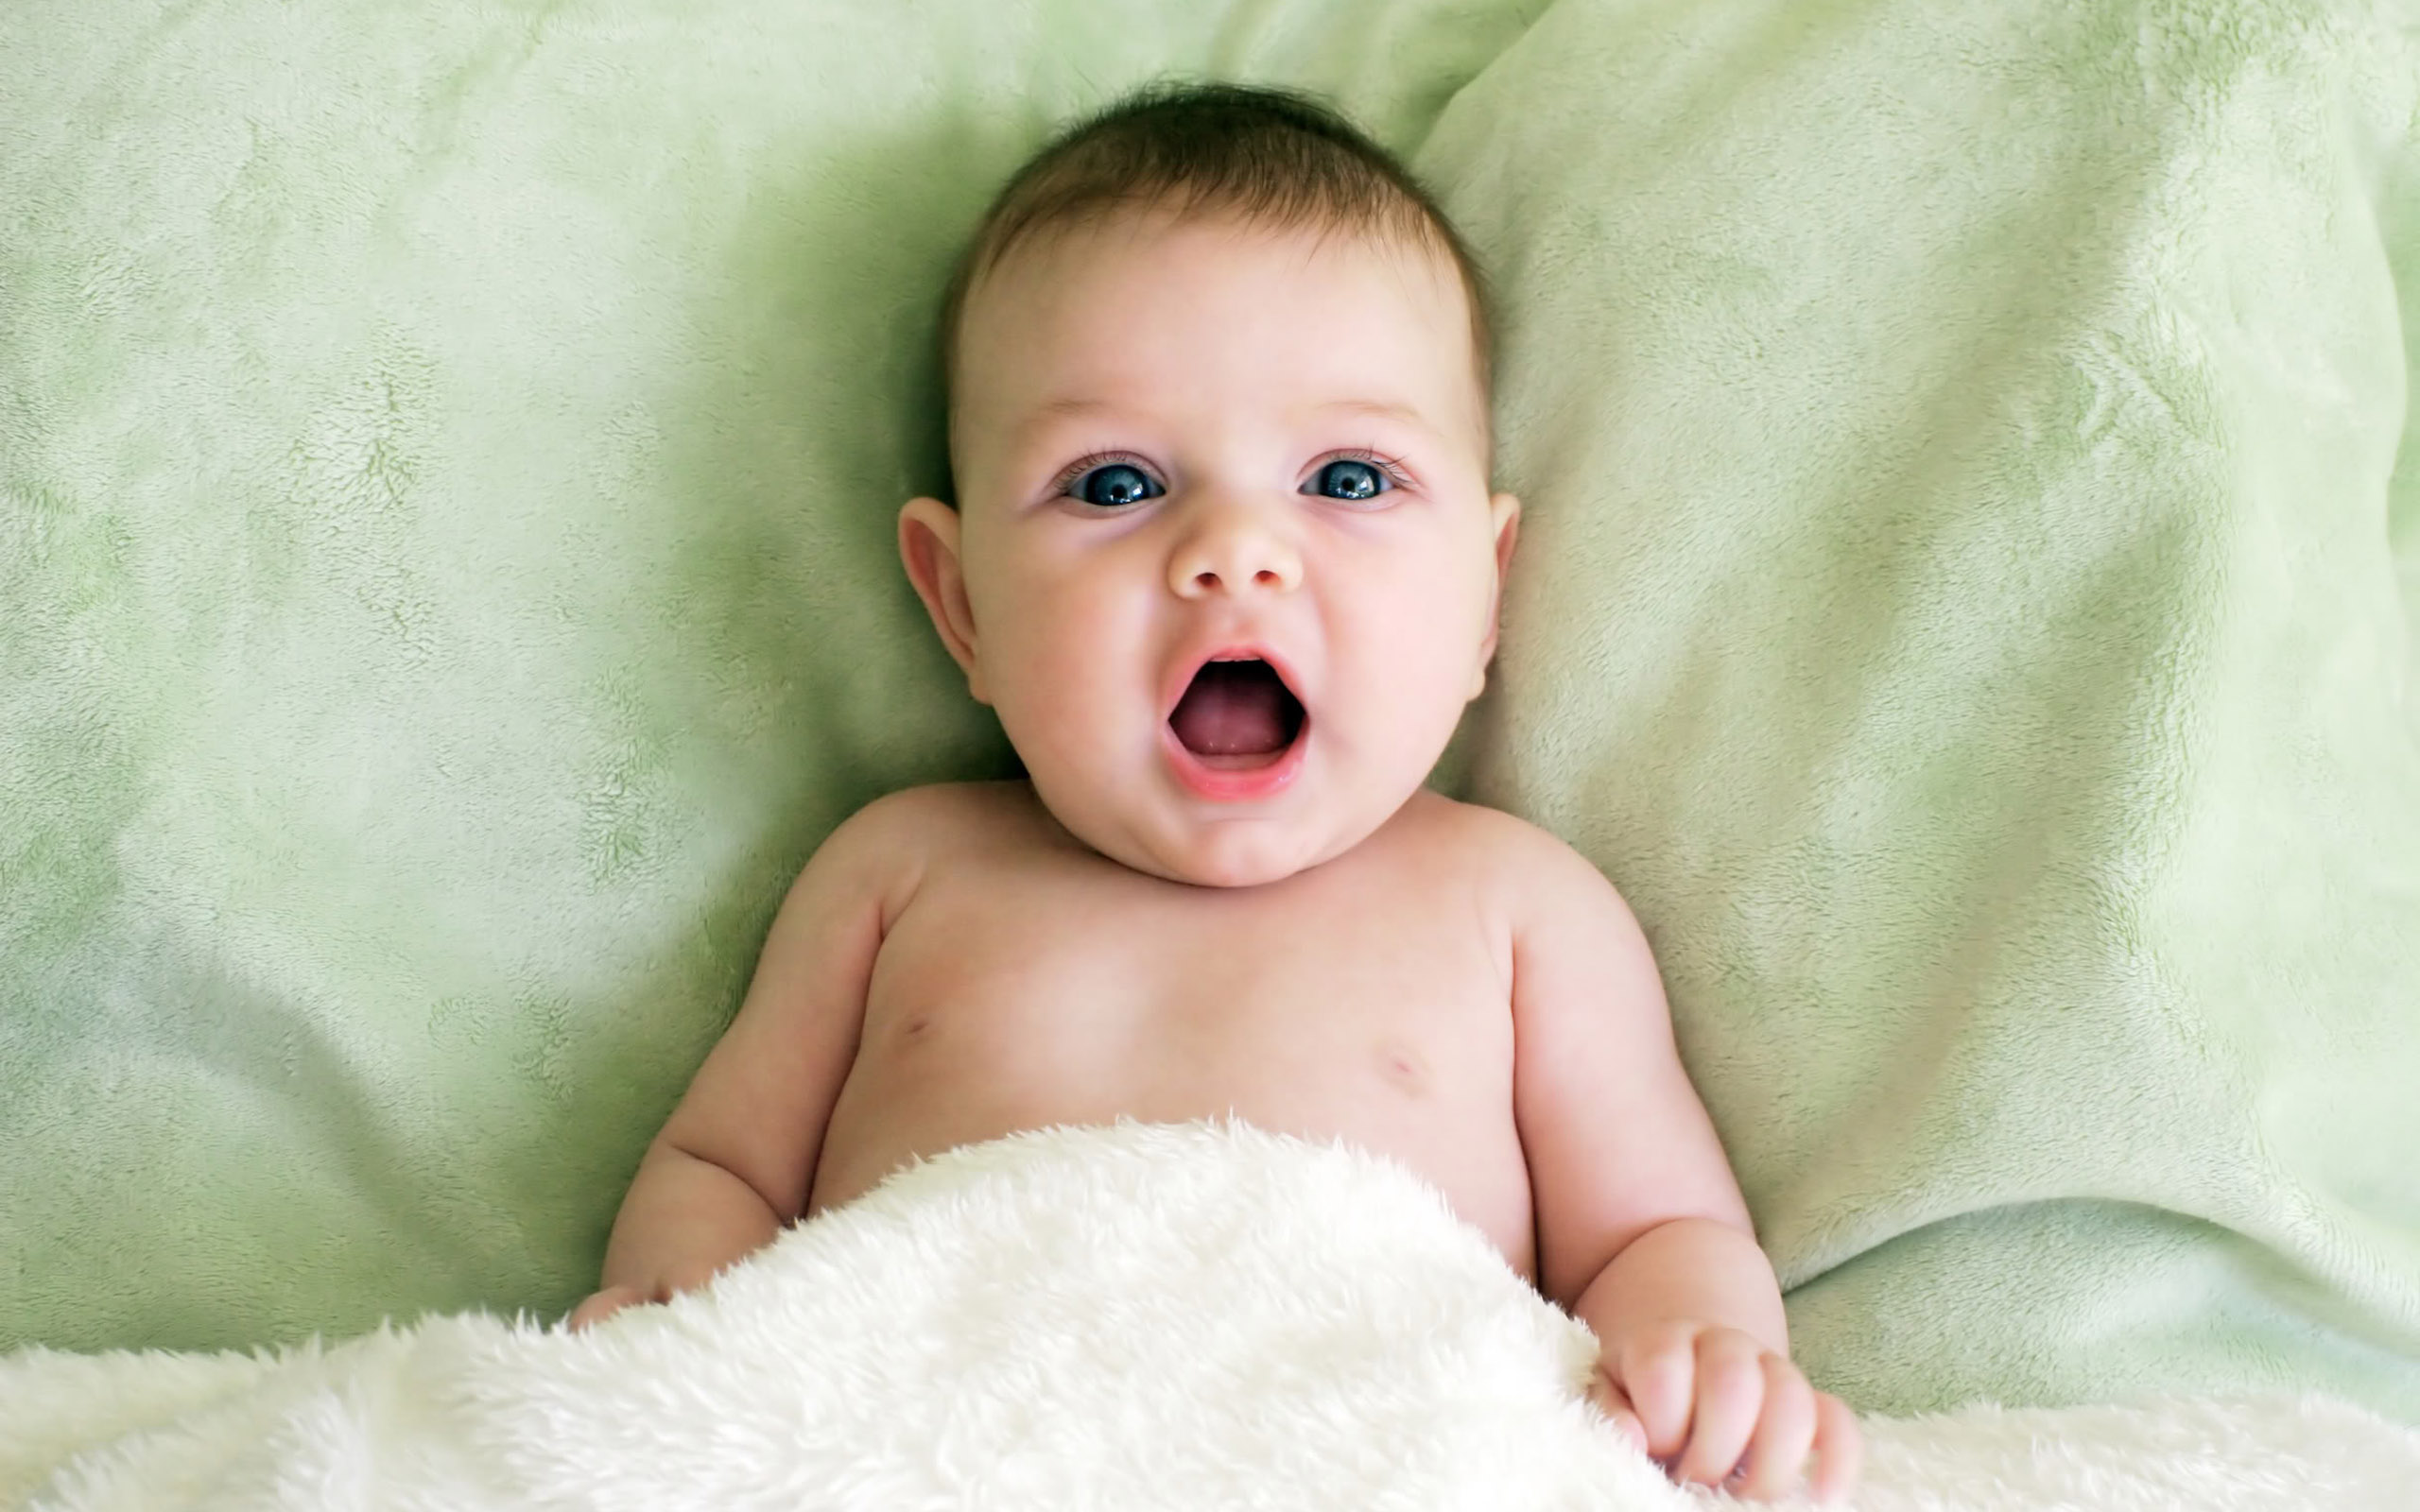 Baby Open Mouth Wallpaper Adorable Babies